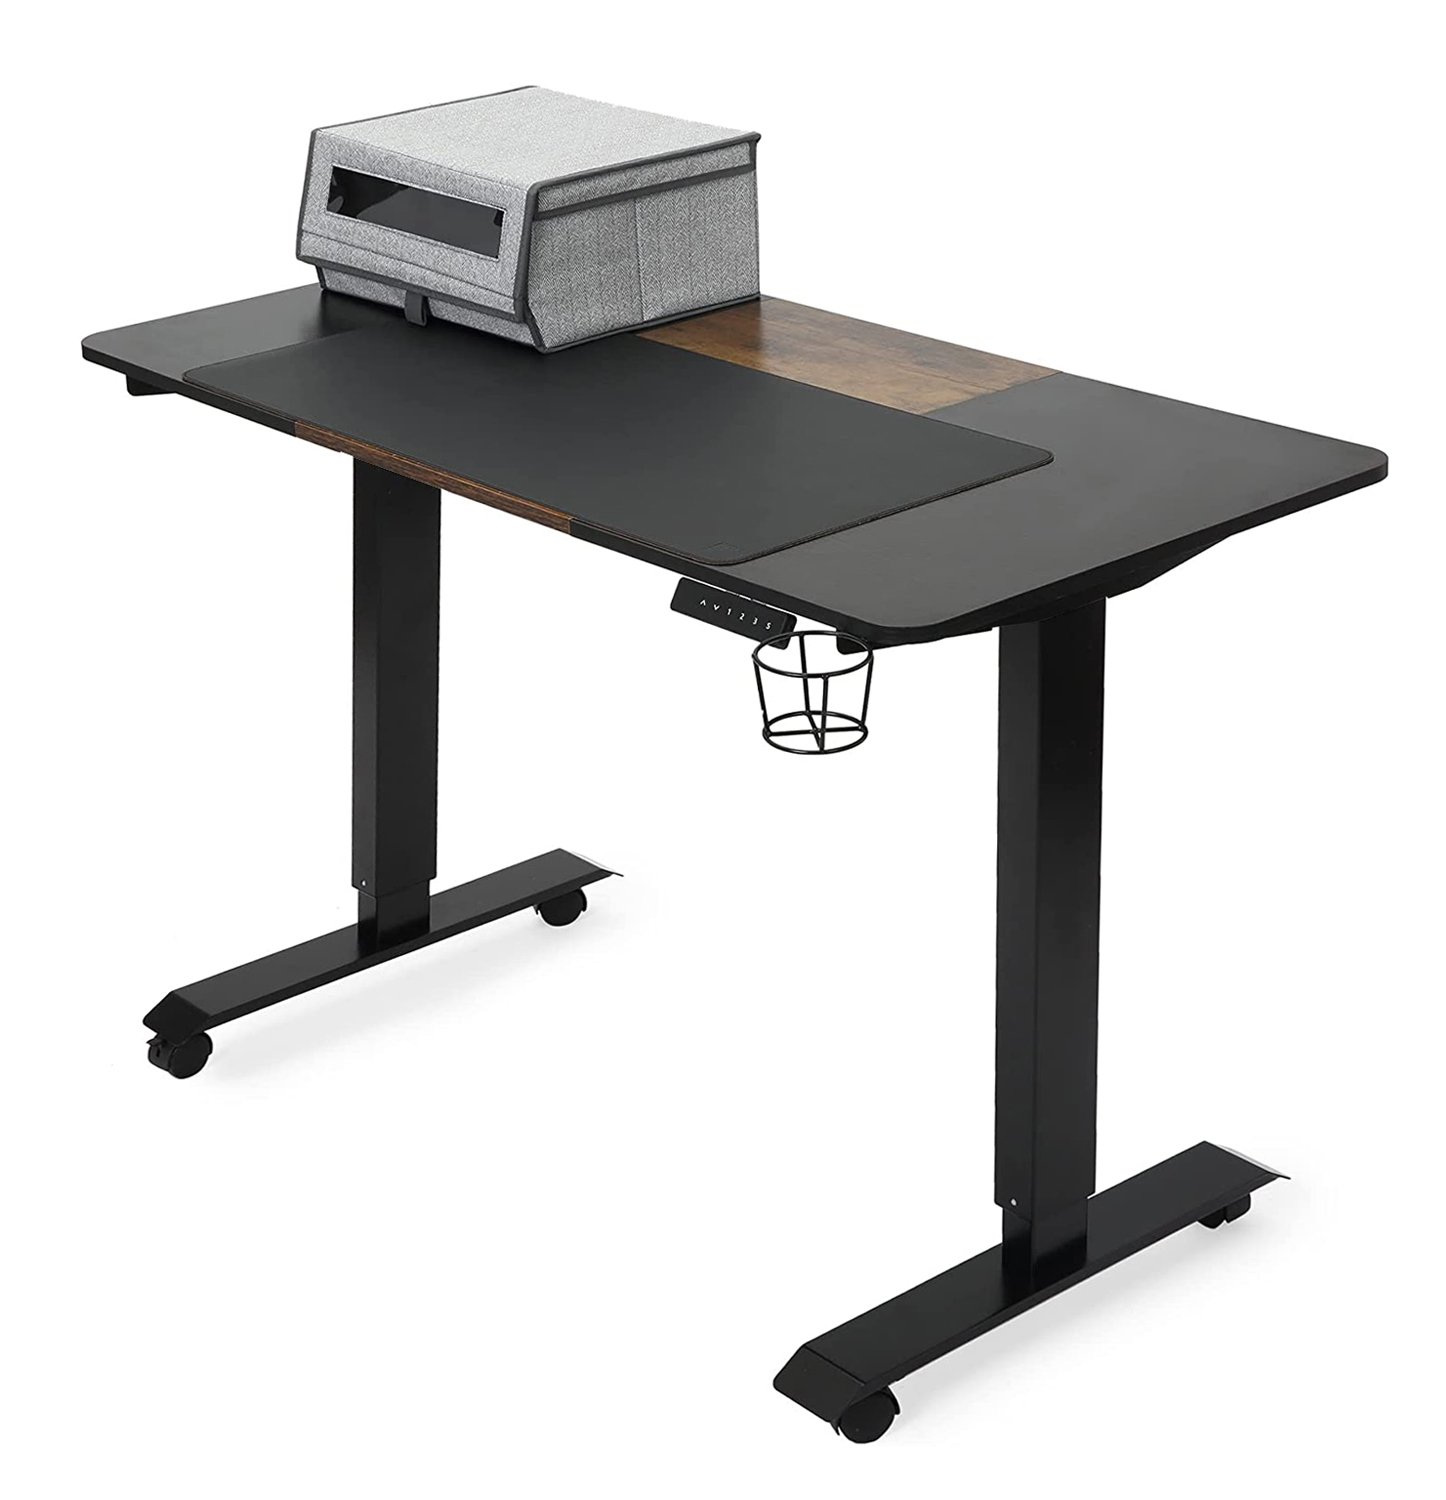 Fromann Electric Dual Motor Height Adjustable Desk with USB Handset - 48 x 24 Inches Sit Stand Home Office Standing Desk with Desk Pad and Storage Containers